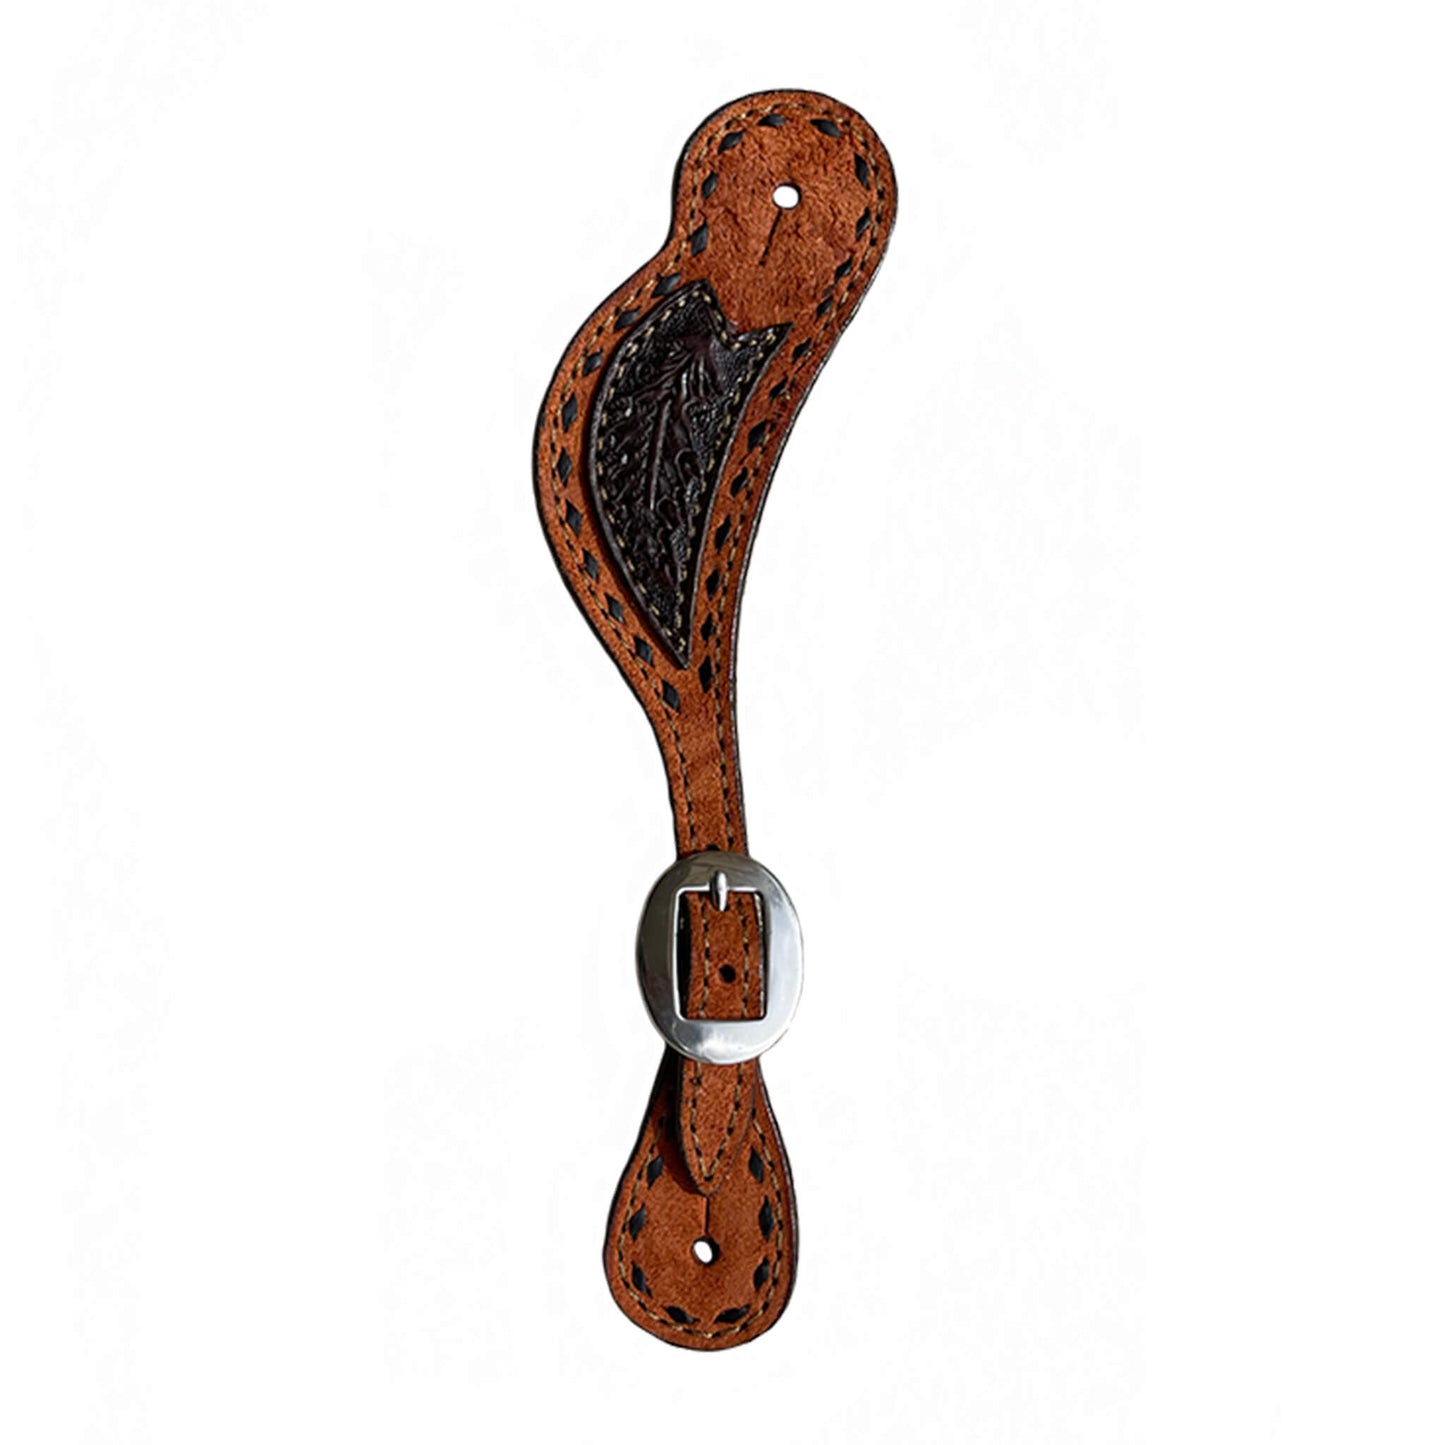 Men's spur straps rough out toast leather with chocolate oak leaf tooled patch and black buckstitch. 